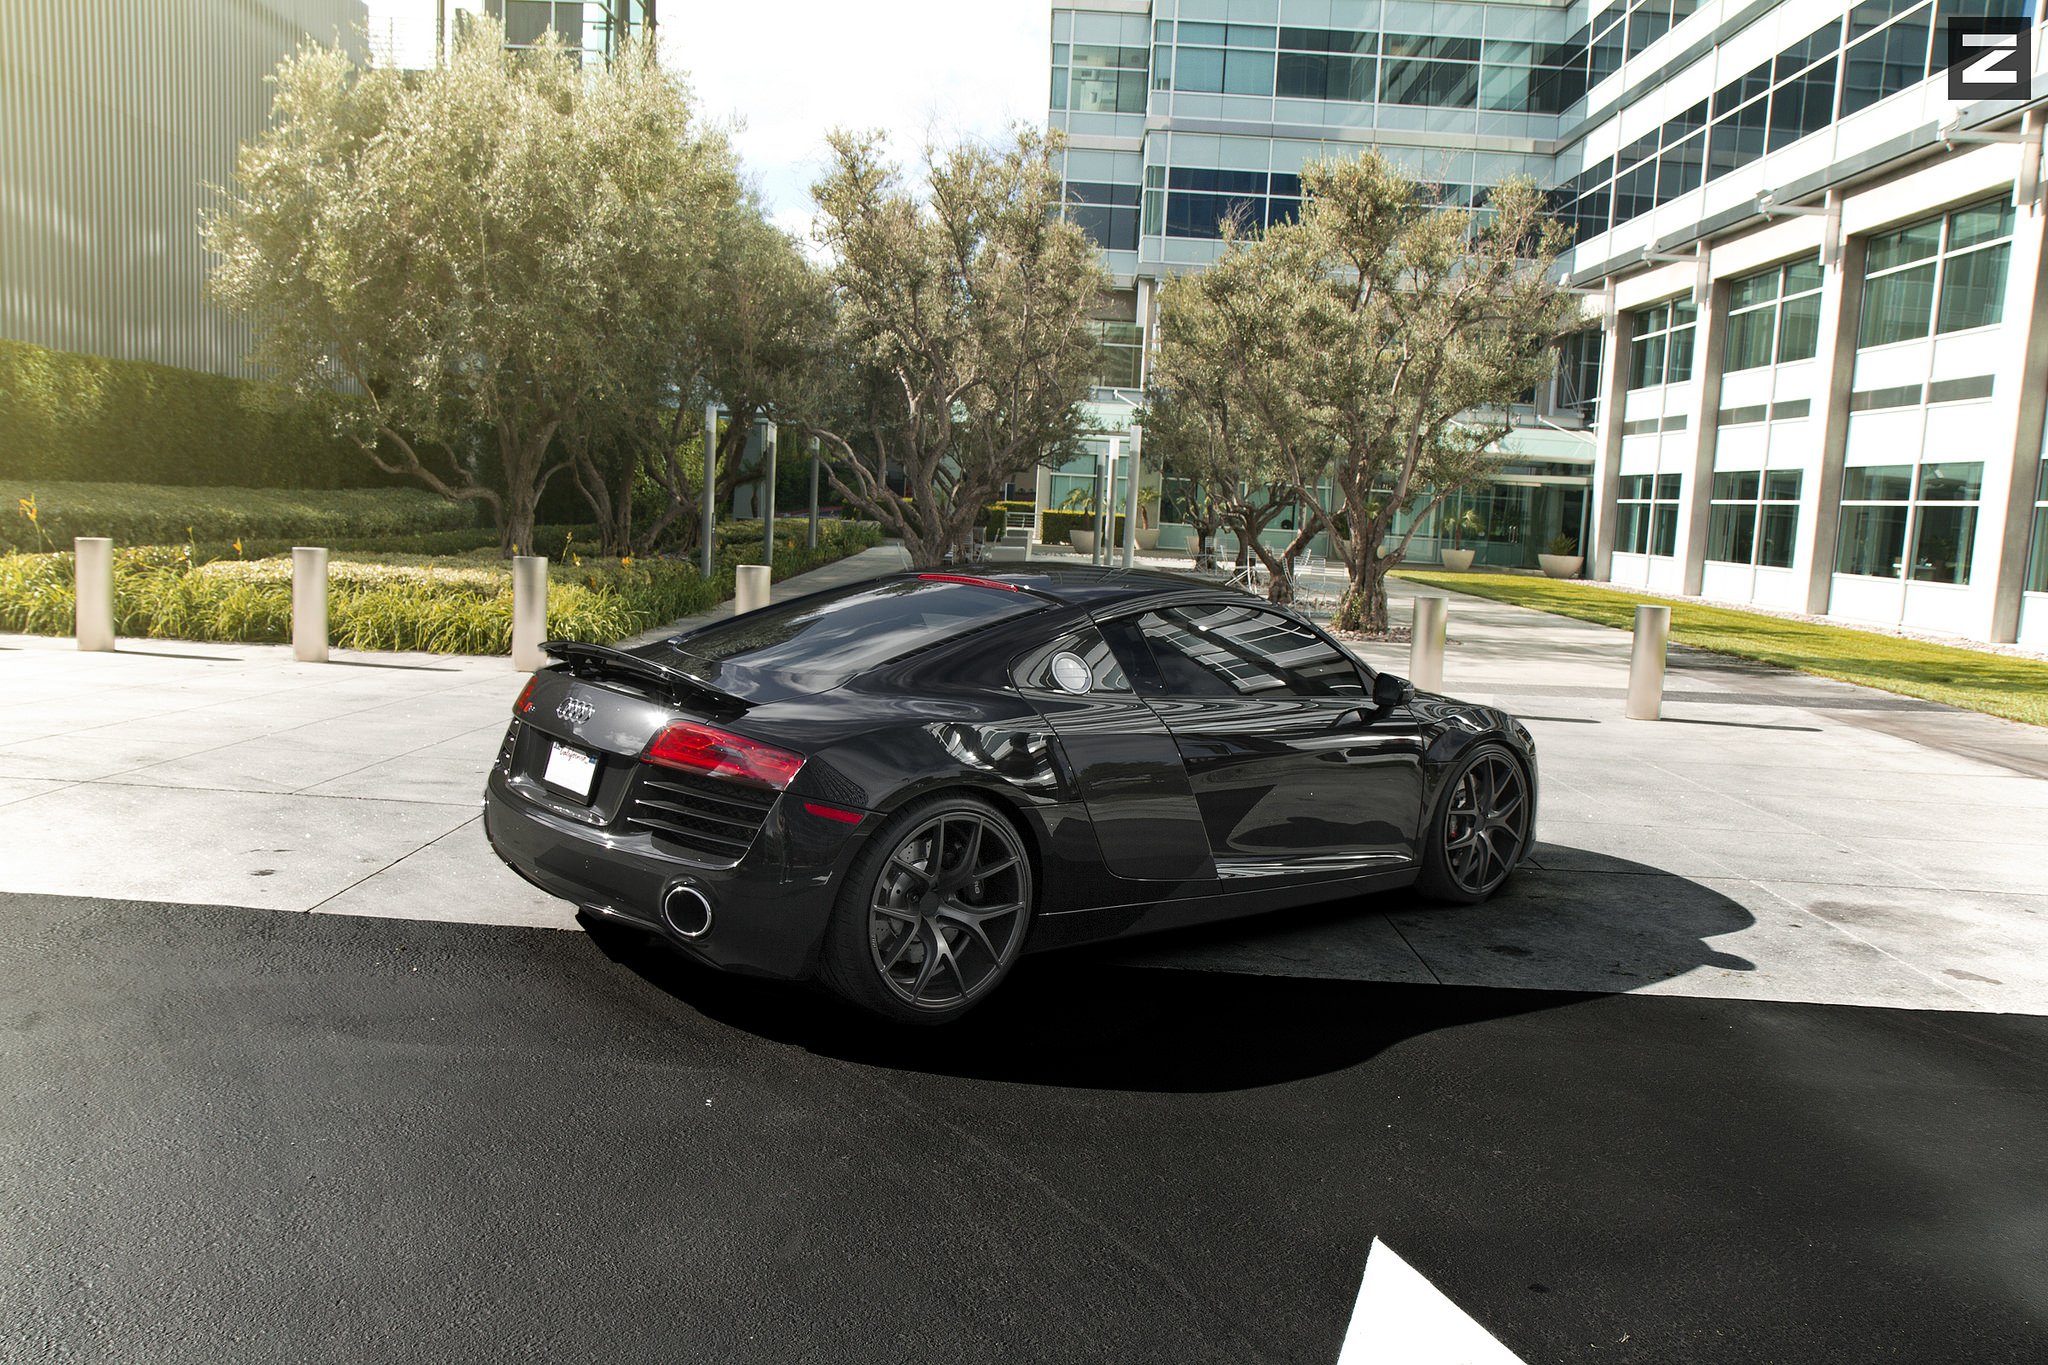 Aftermarket Side Scoops on Black Audi R8 - Photo by Zito Wheels